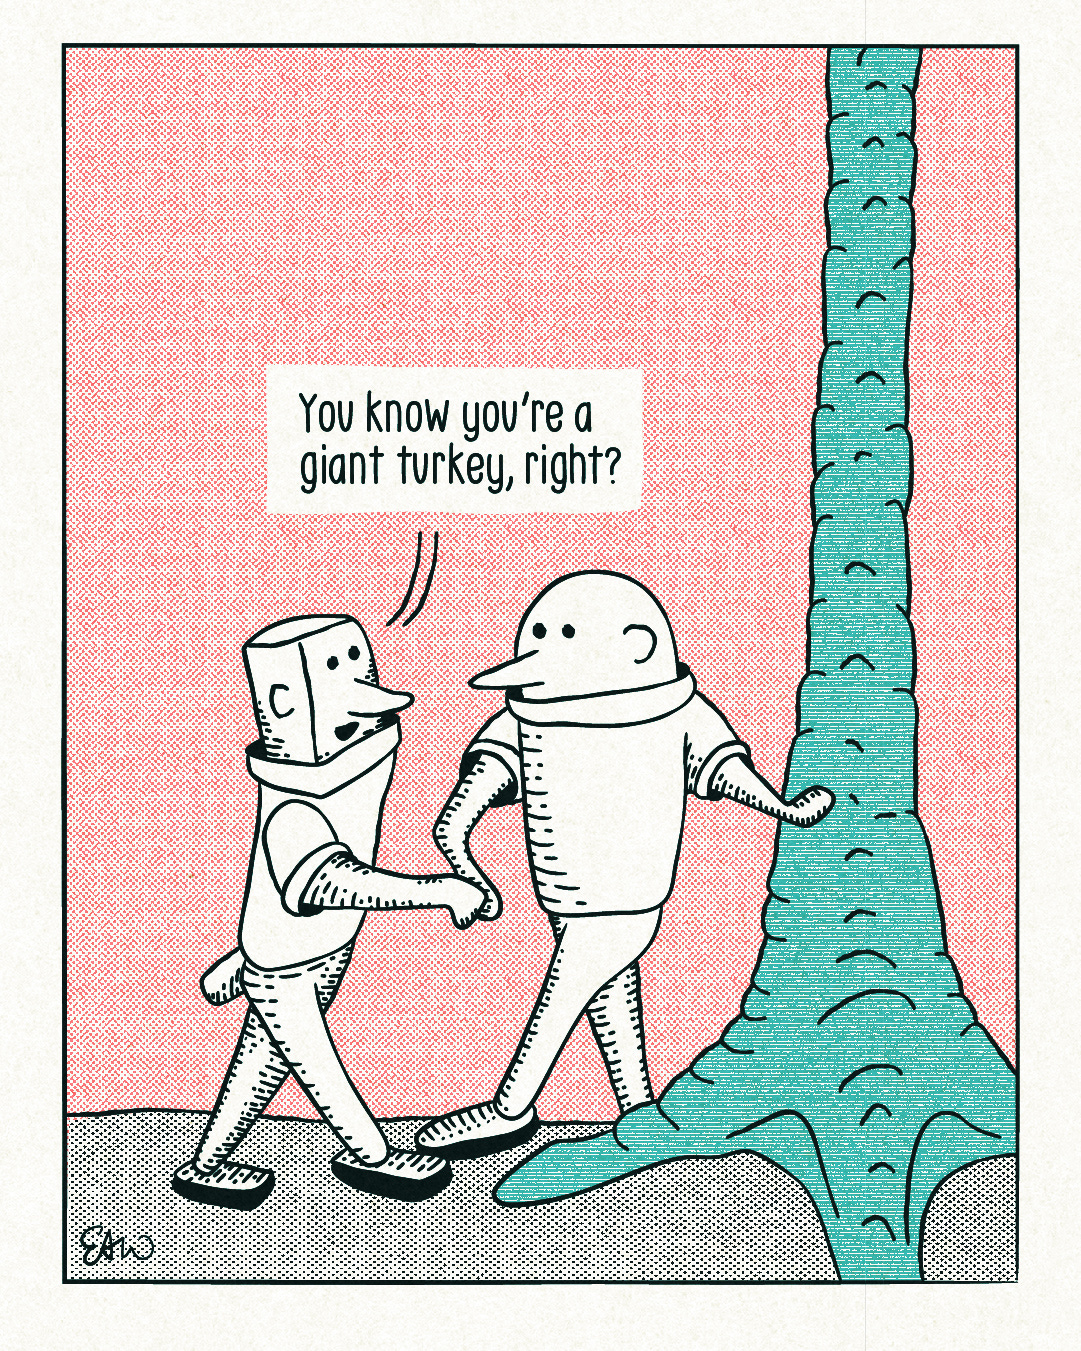 Panel one of two of a cartoon drawn in a vintage style. One character on the left looks at another on the right of the page who appears to be leaning against a tall tree trunk. The character on the left says, “You know you're a giant turkey, right?”